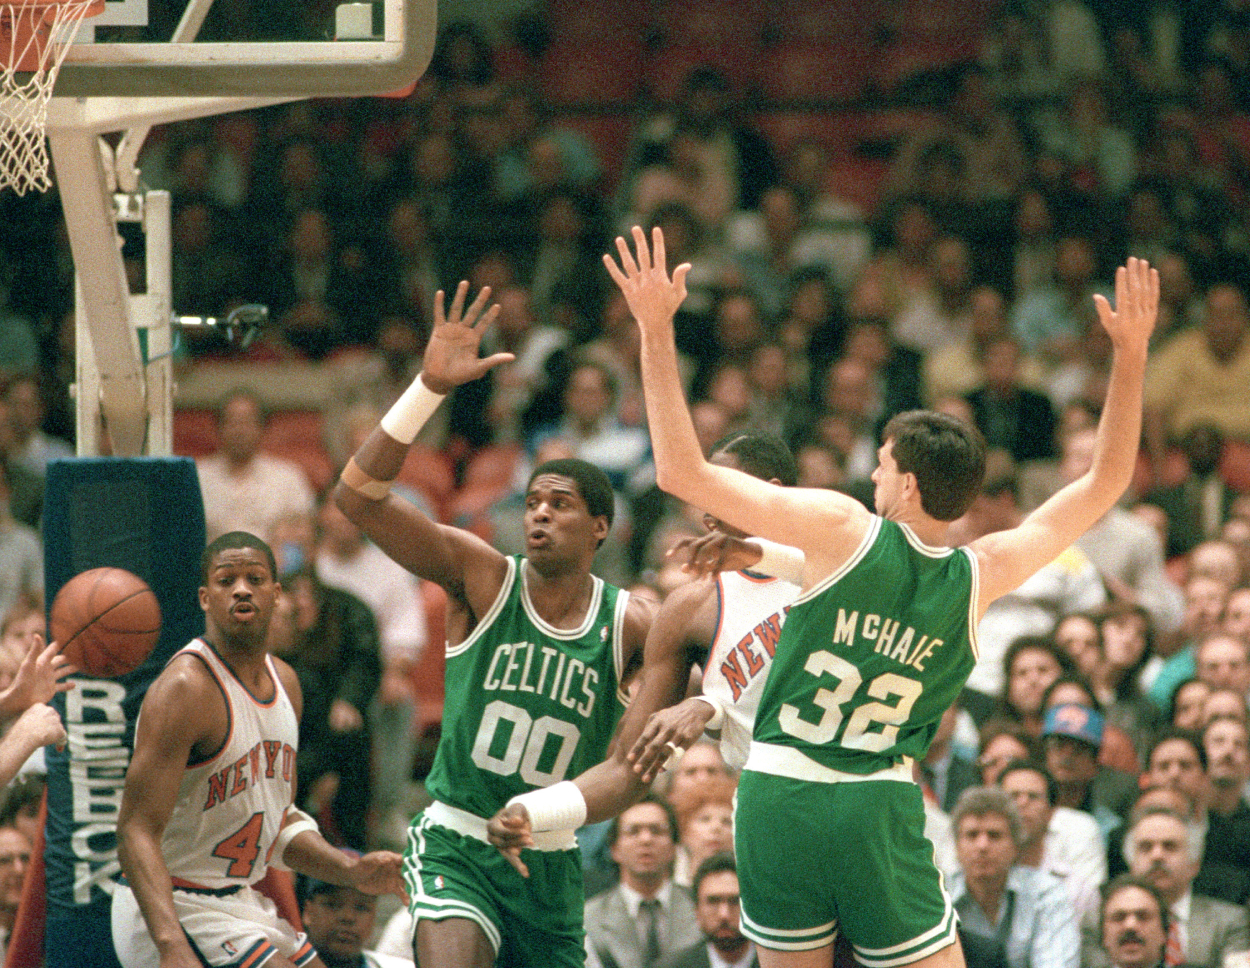 Boston Celtics center Robert Parish (00) in action during a game May 6, 1988, at Madison Square Garden.